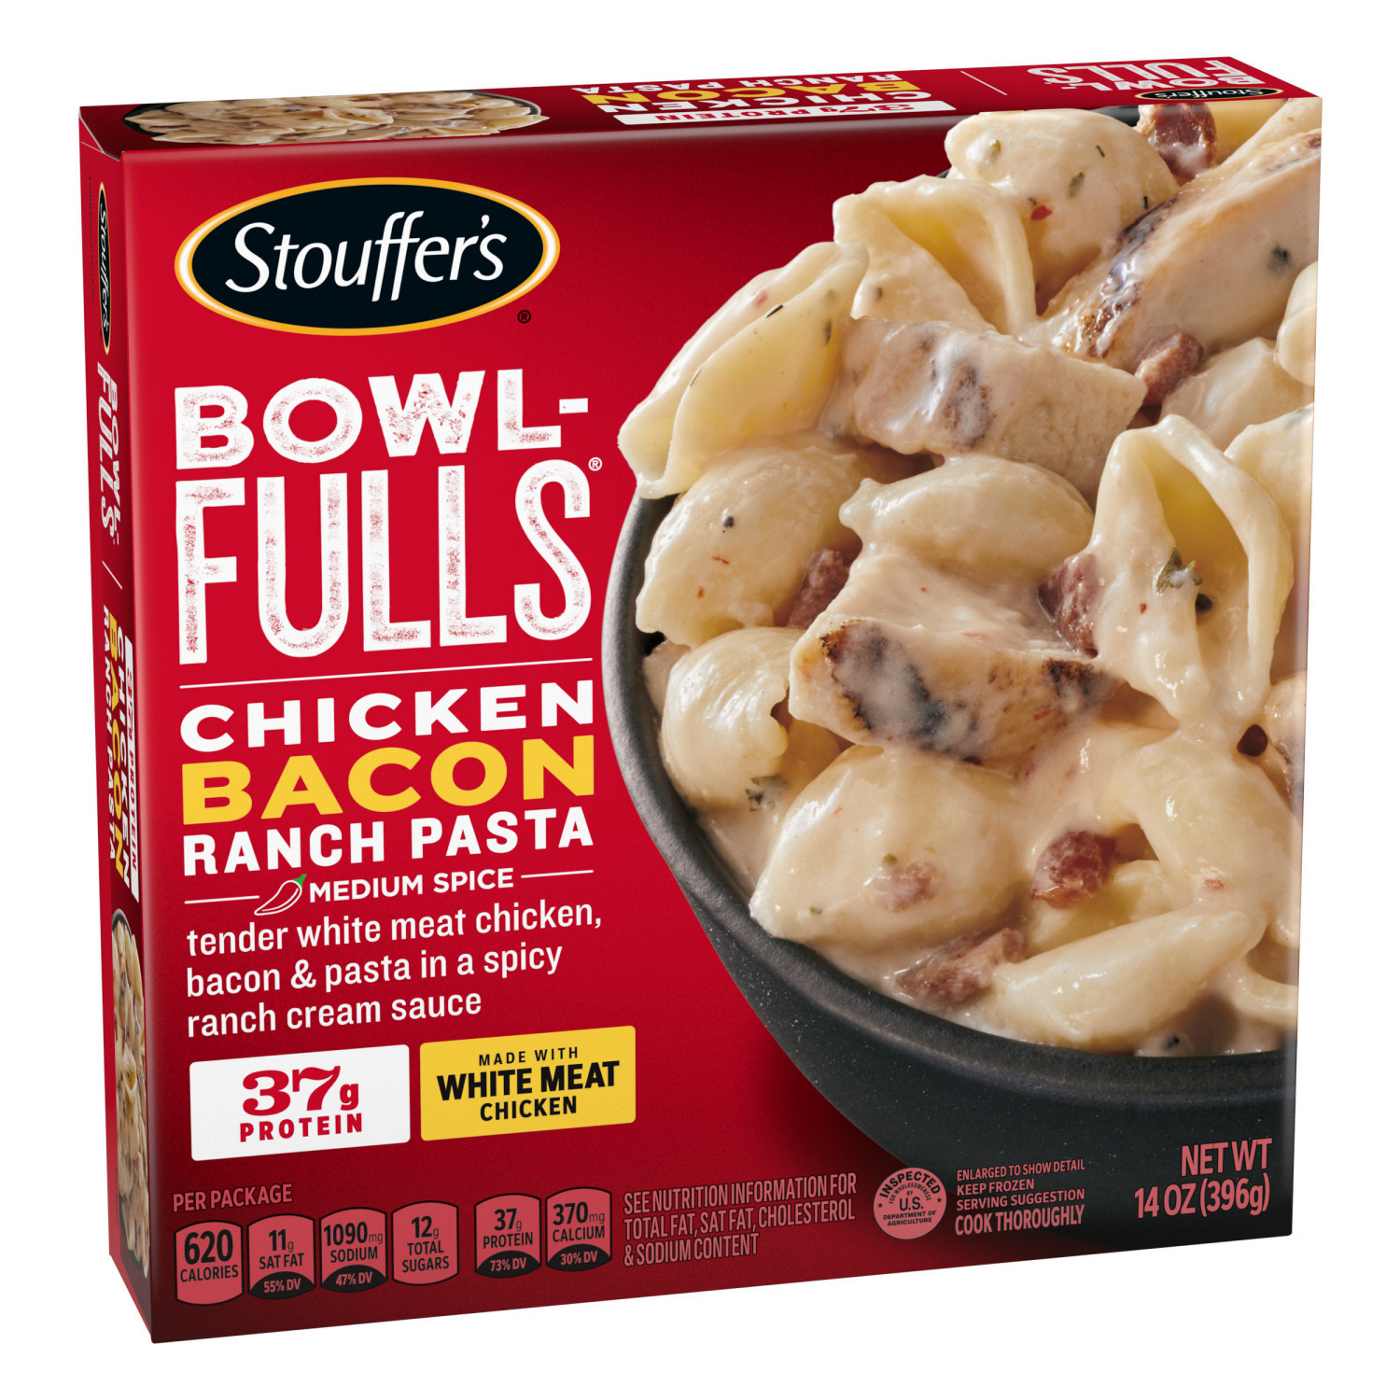 Stouffer's Bowl-Fulls Chicken Bacon Ranch Pasta Frozen Meal; image 5 of 6